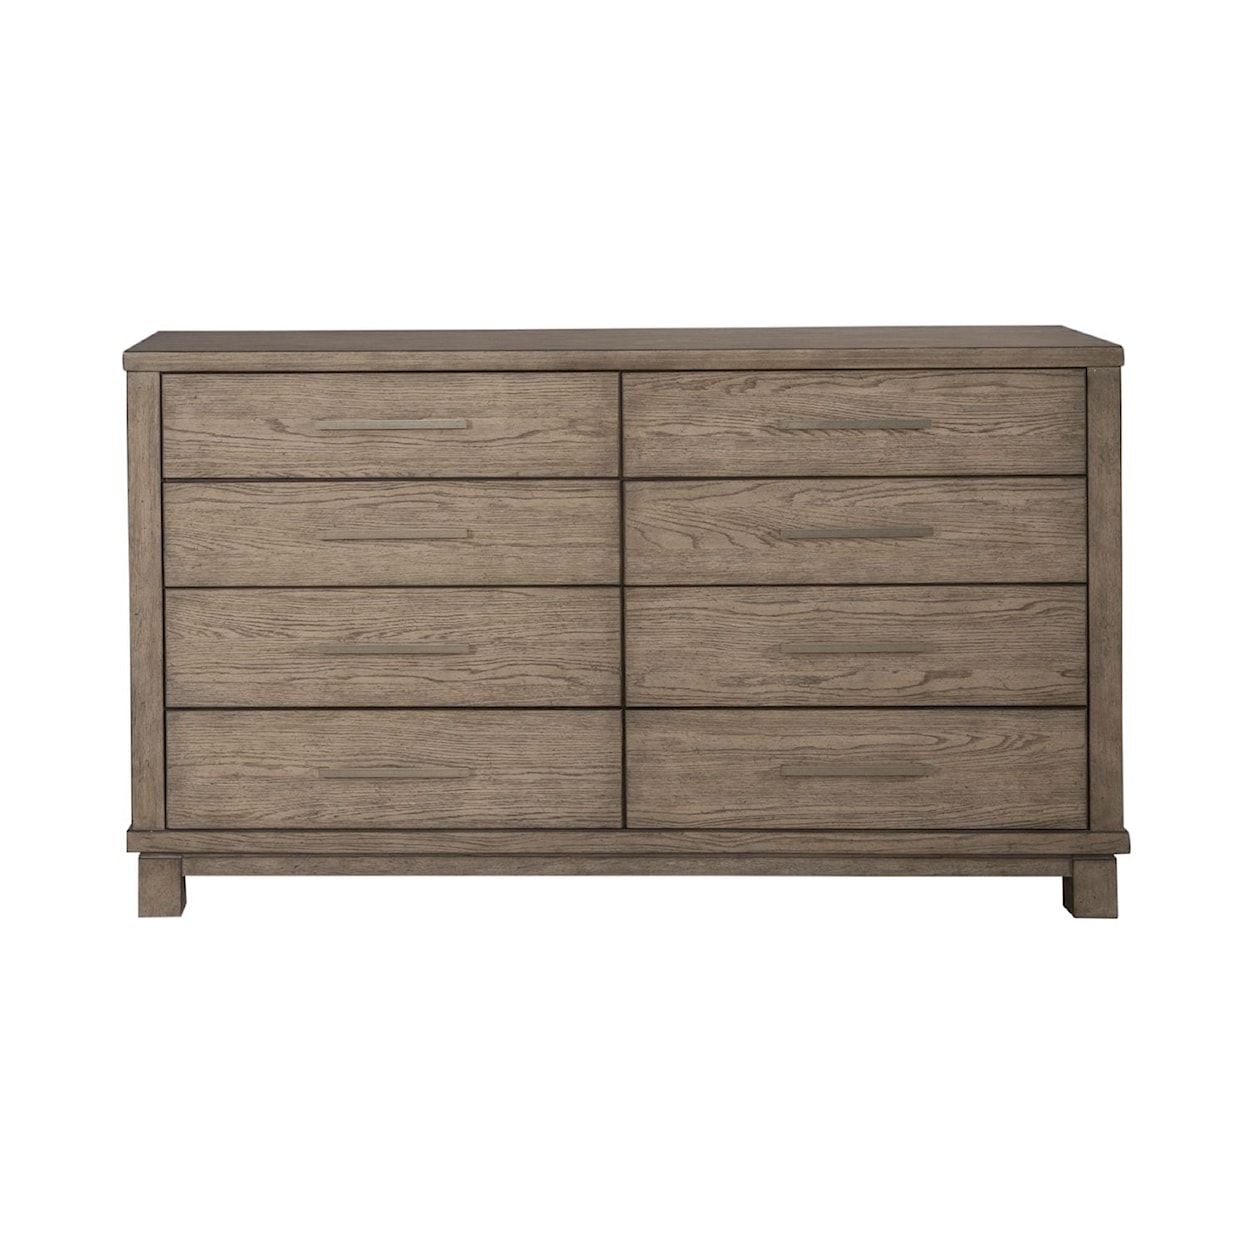 Liberty Furniture Canyon Road 3-Piece Queen Bedroom Group